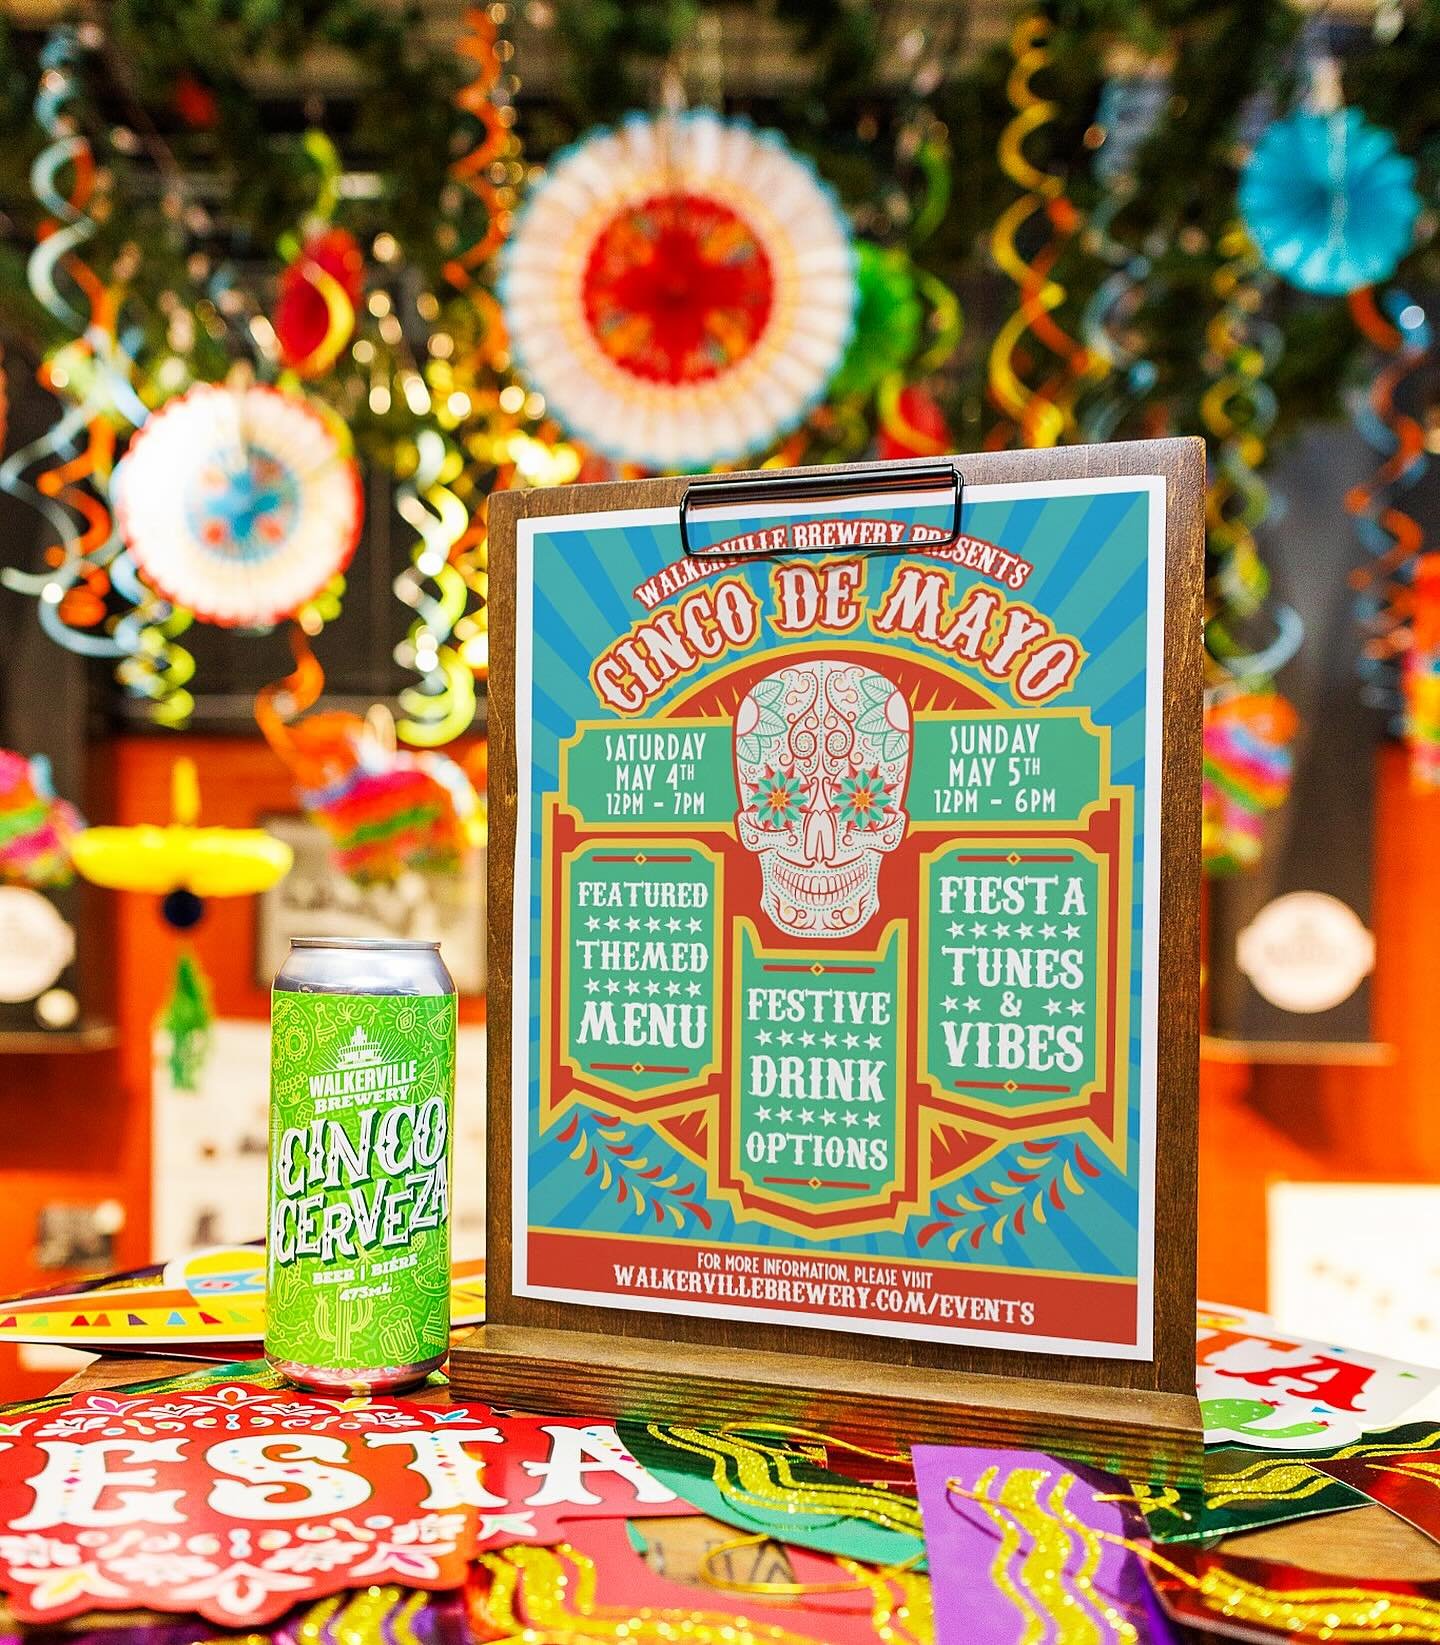 &iexcl;Ol&eacute;! 🌵 The weekend is here and we&rsquo;re gearing up to have quite the fiesta!

Join us at the brewery on Saturday, May 4th and Sunday, May 5th for our Cinco de Mayo celebration featuring:

🍺 The return of our limited-edition Cinco C